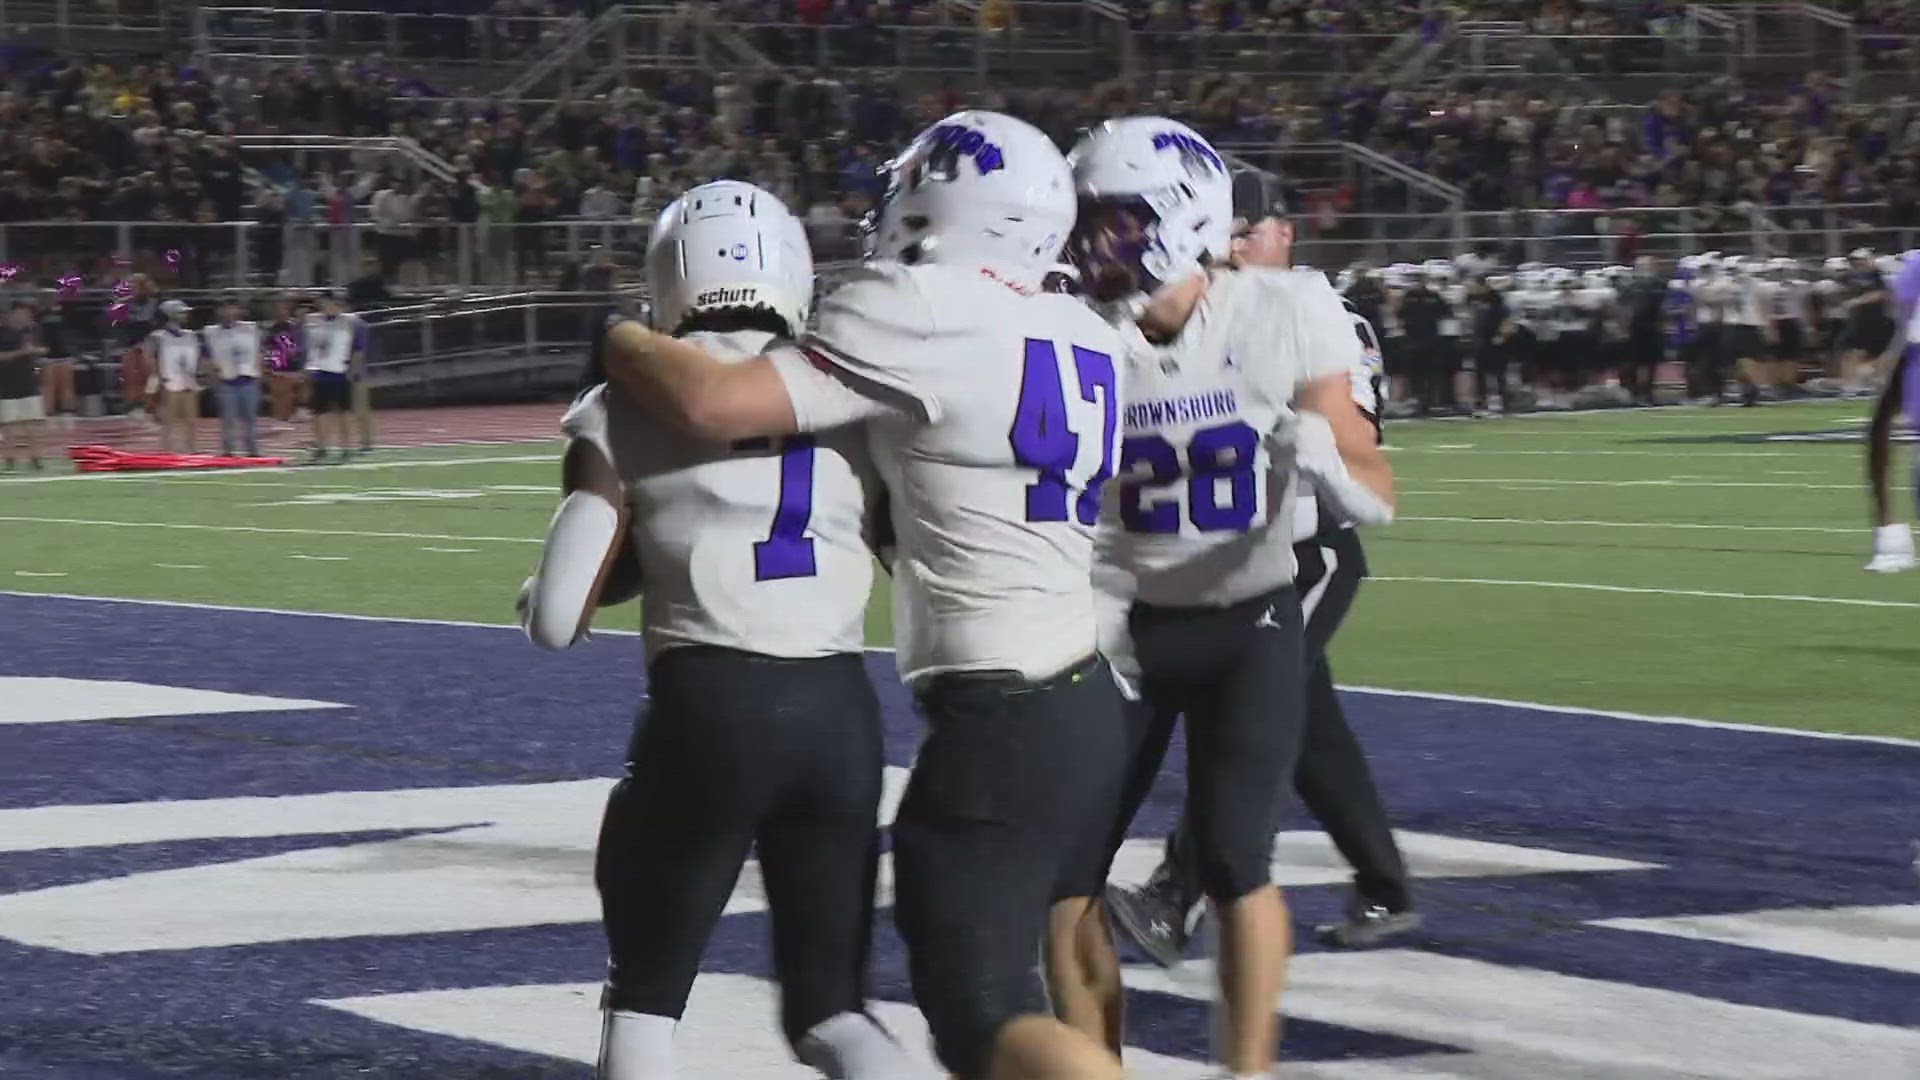 Ben Davis outscored Brownsburg 21-6 in the fourth quarter to complete the comeback.